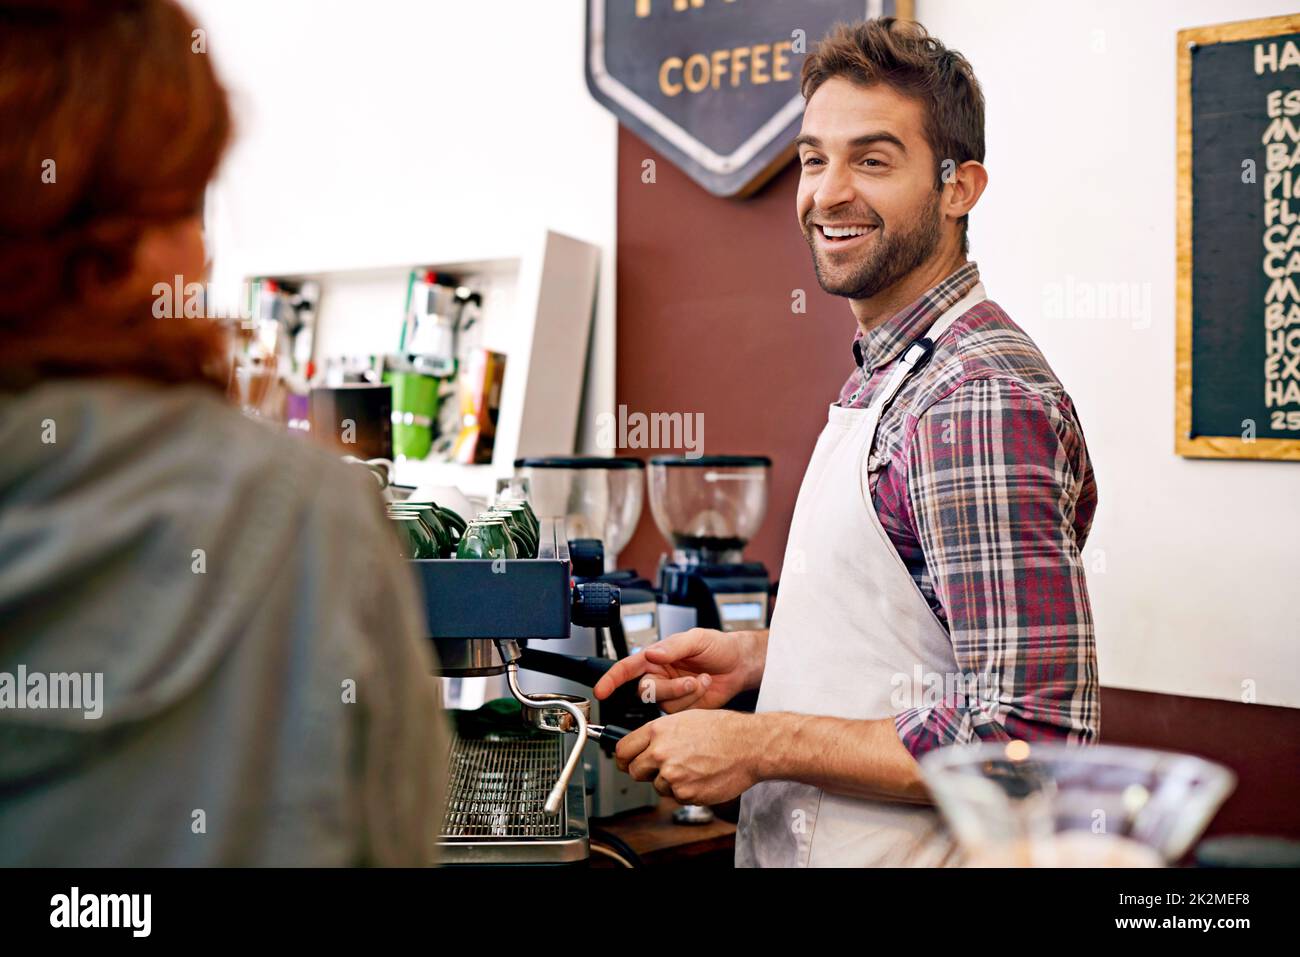 Service with smile. Shot of a young woman ordering coffee in a cafe. Stock Photo